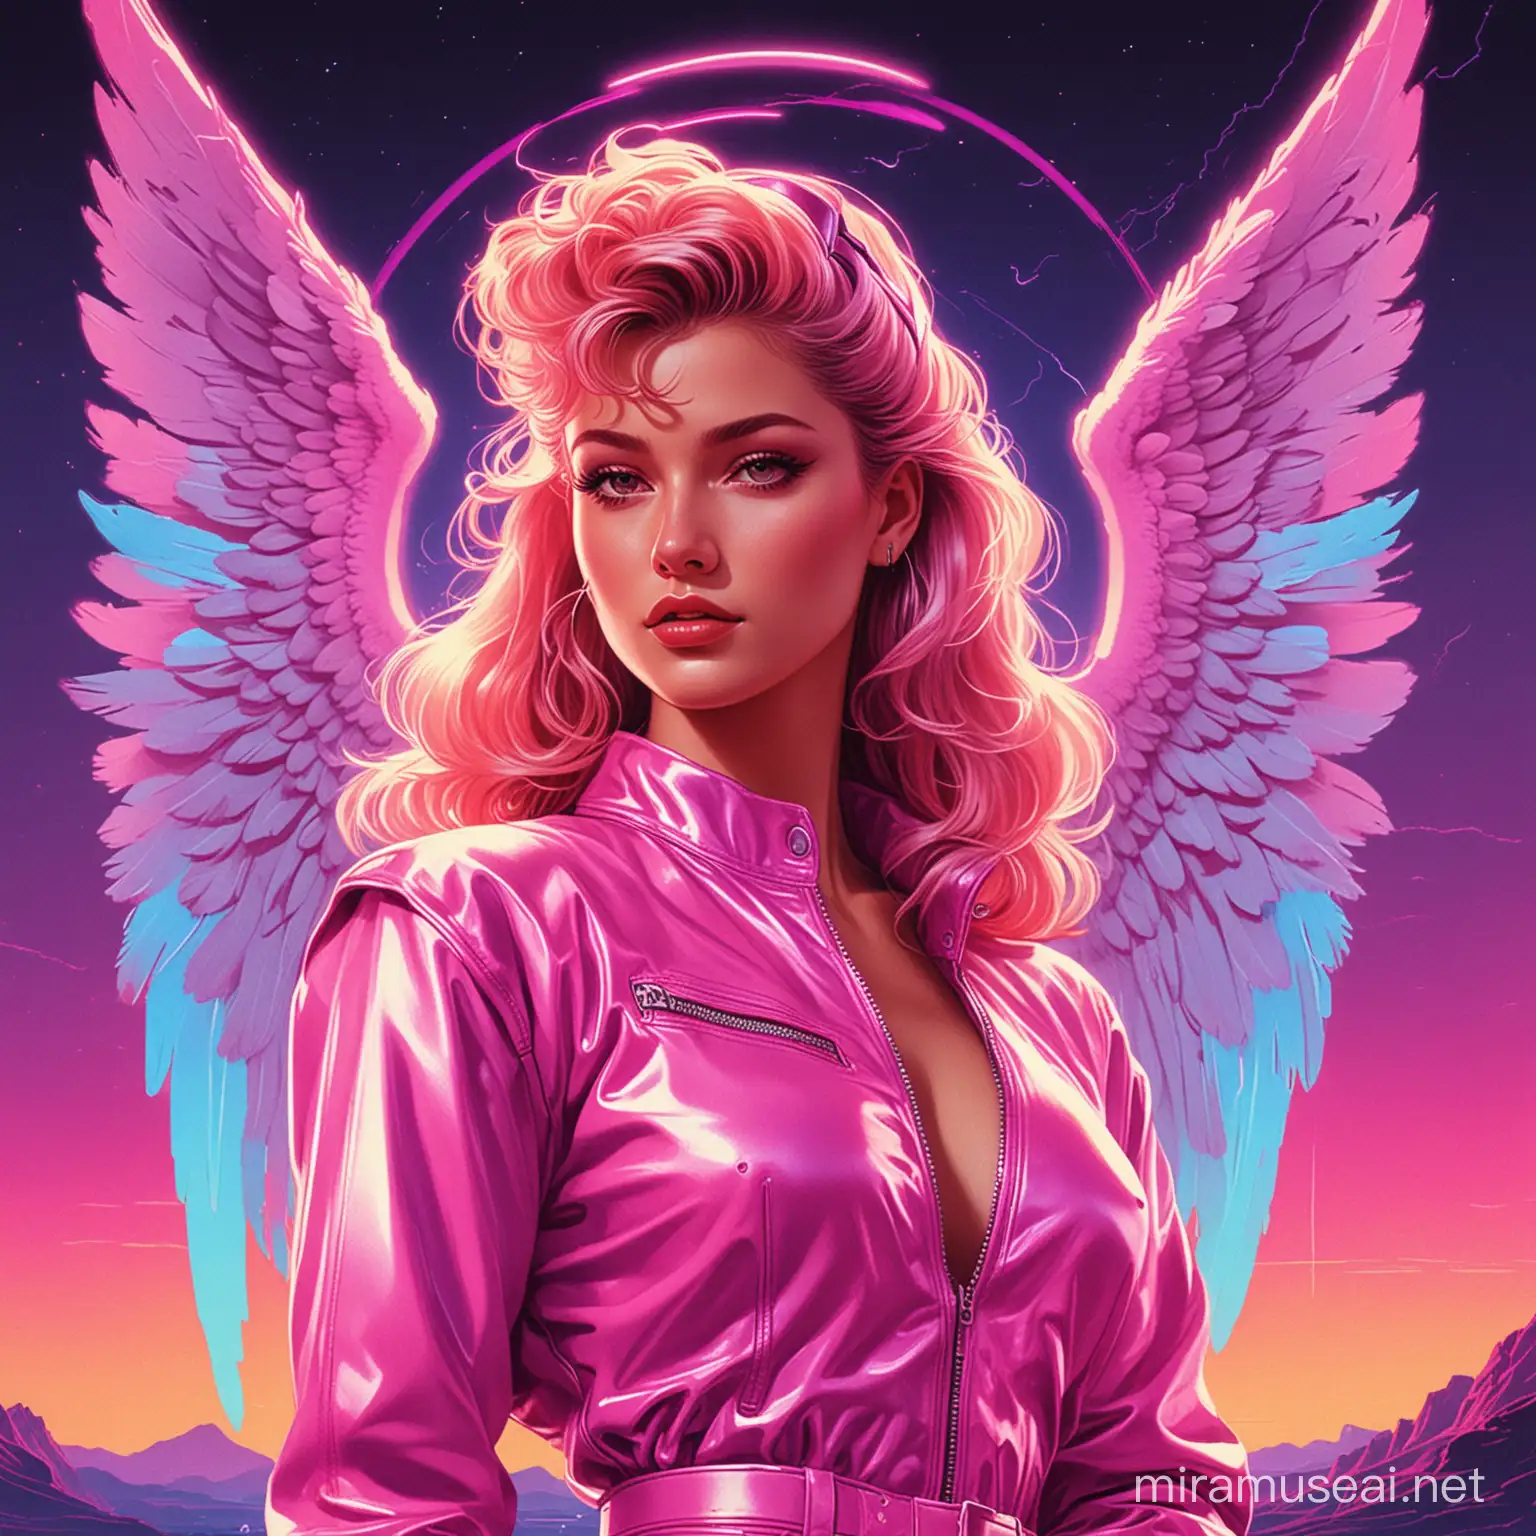 90s synthwave style art of angel